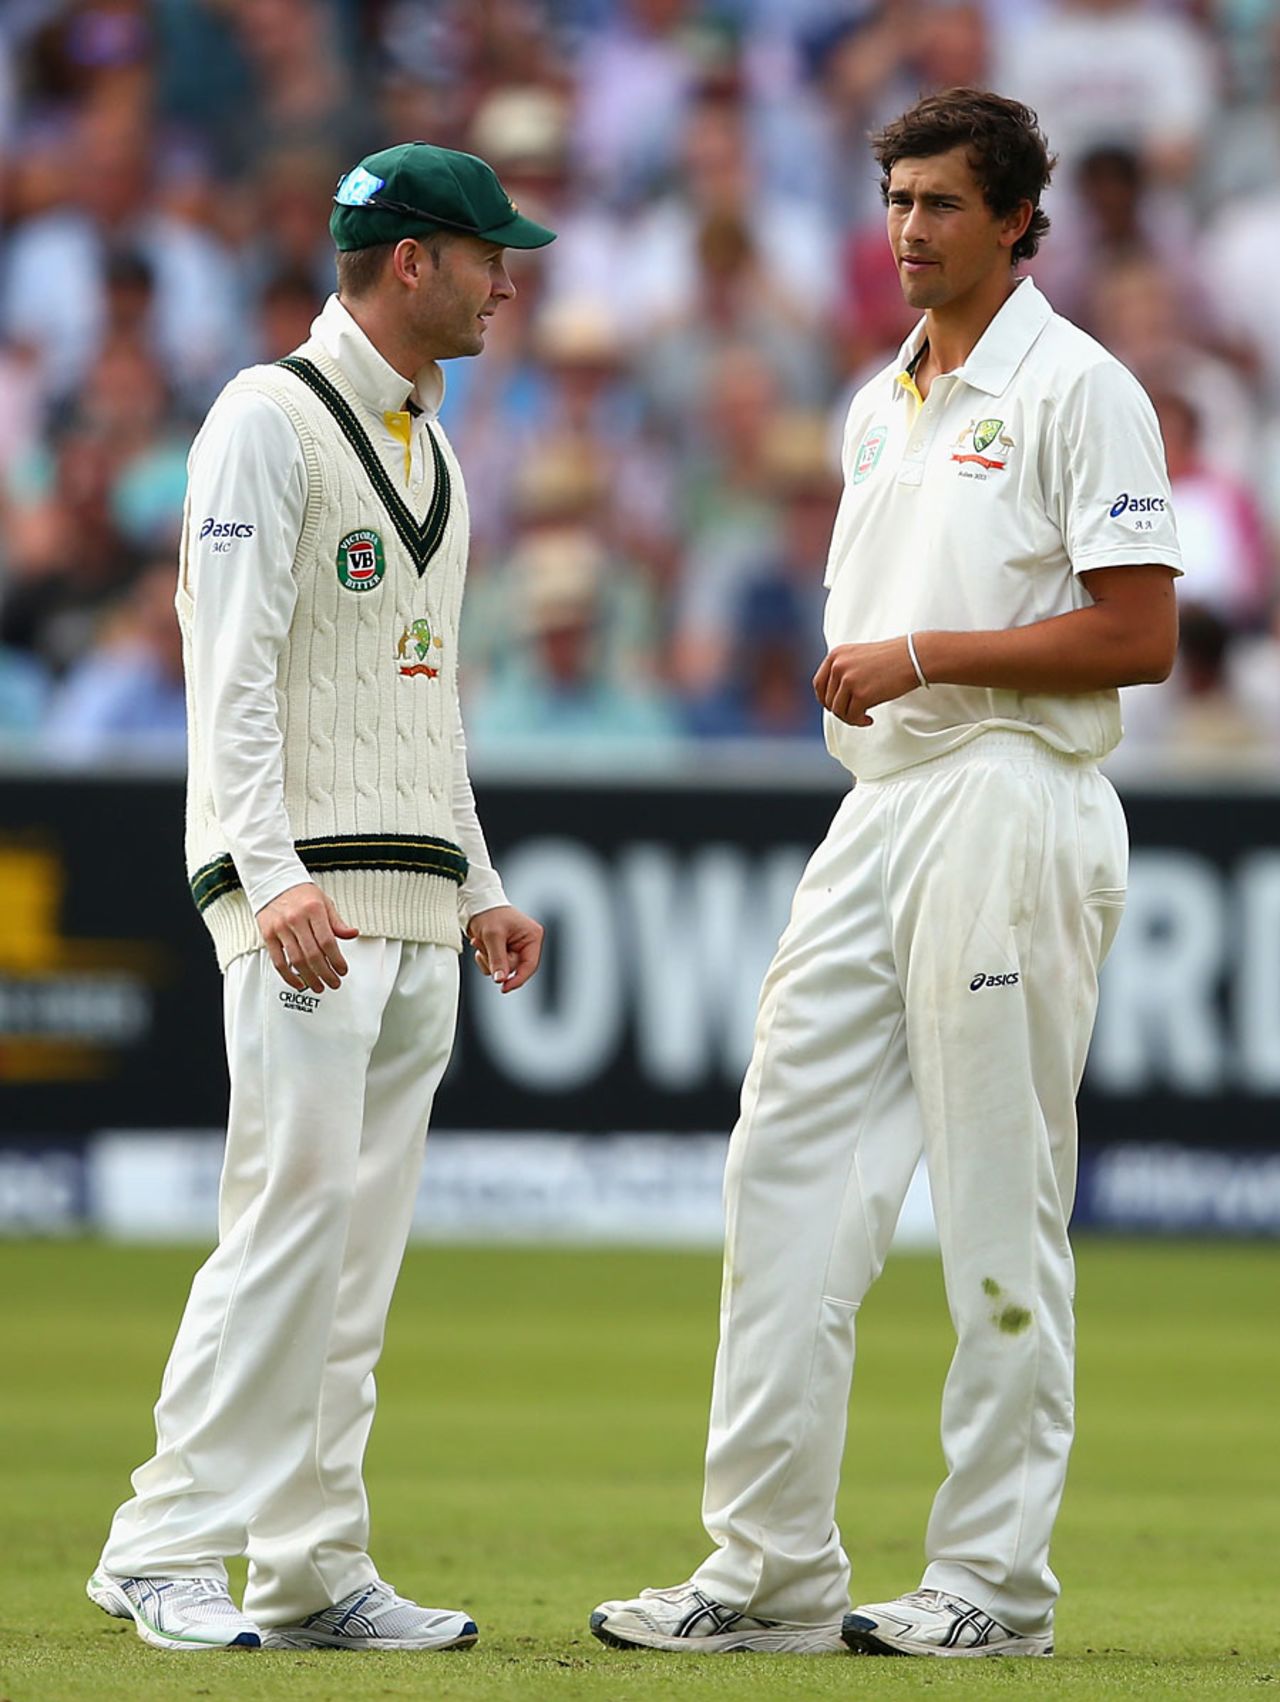 Michael Clarke chats with Ashton Agar, England v Australia, 2nd Investec Test, Lord's, 3rd day, July 20, 2013